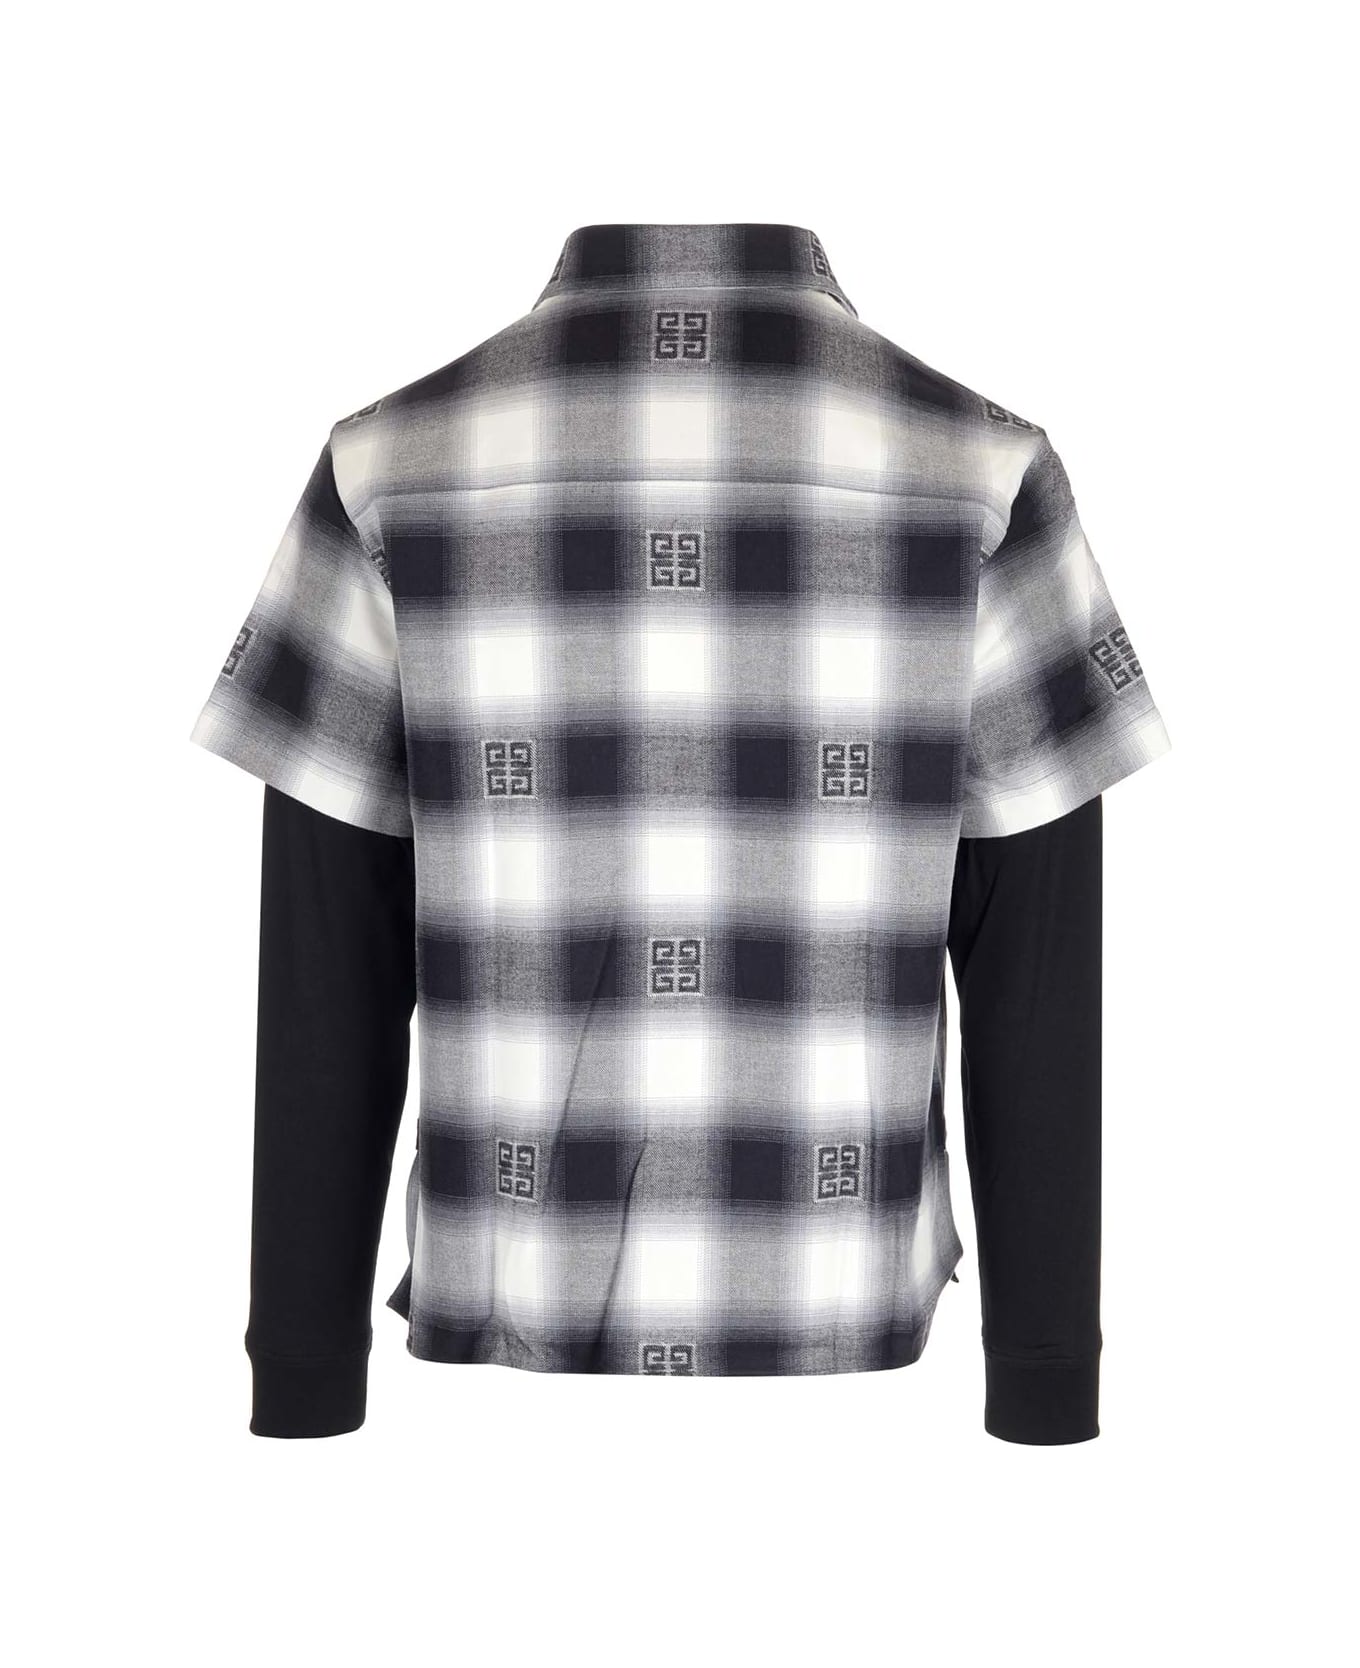 Givenchy Flannel Shirt - Black